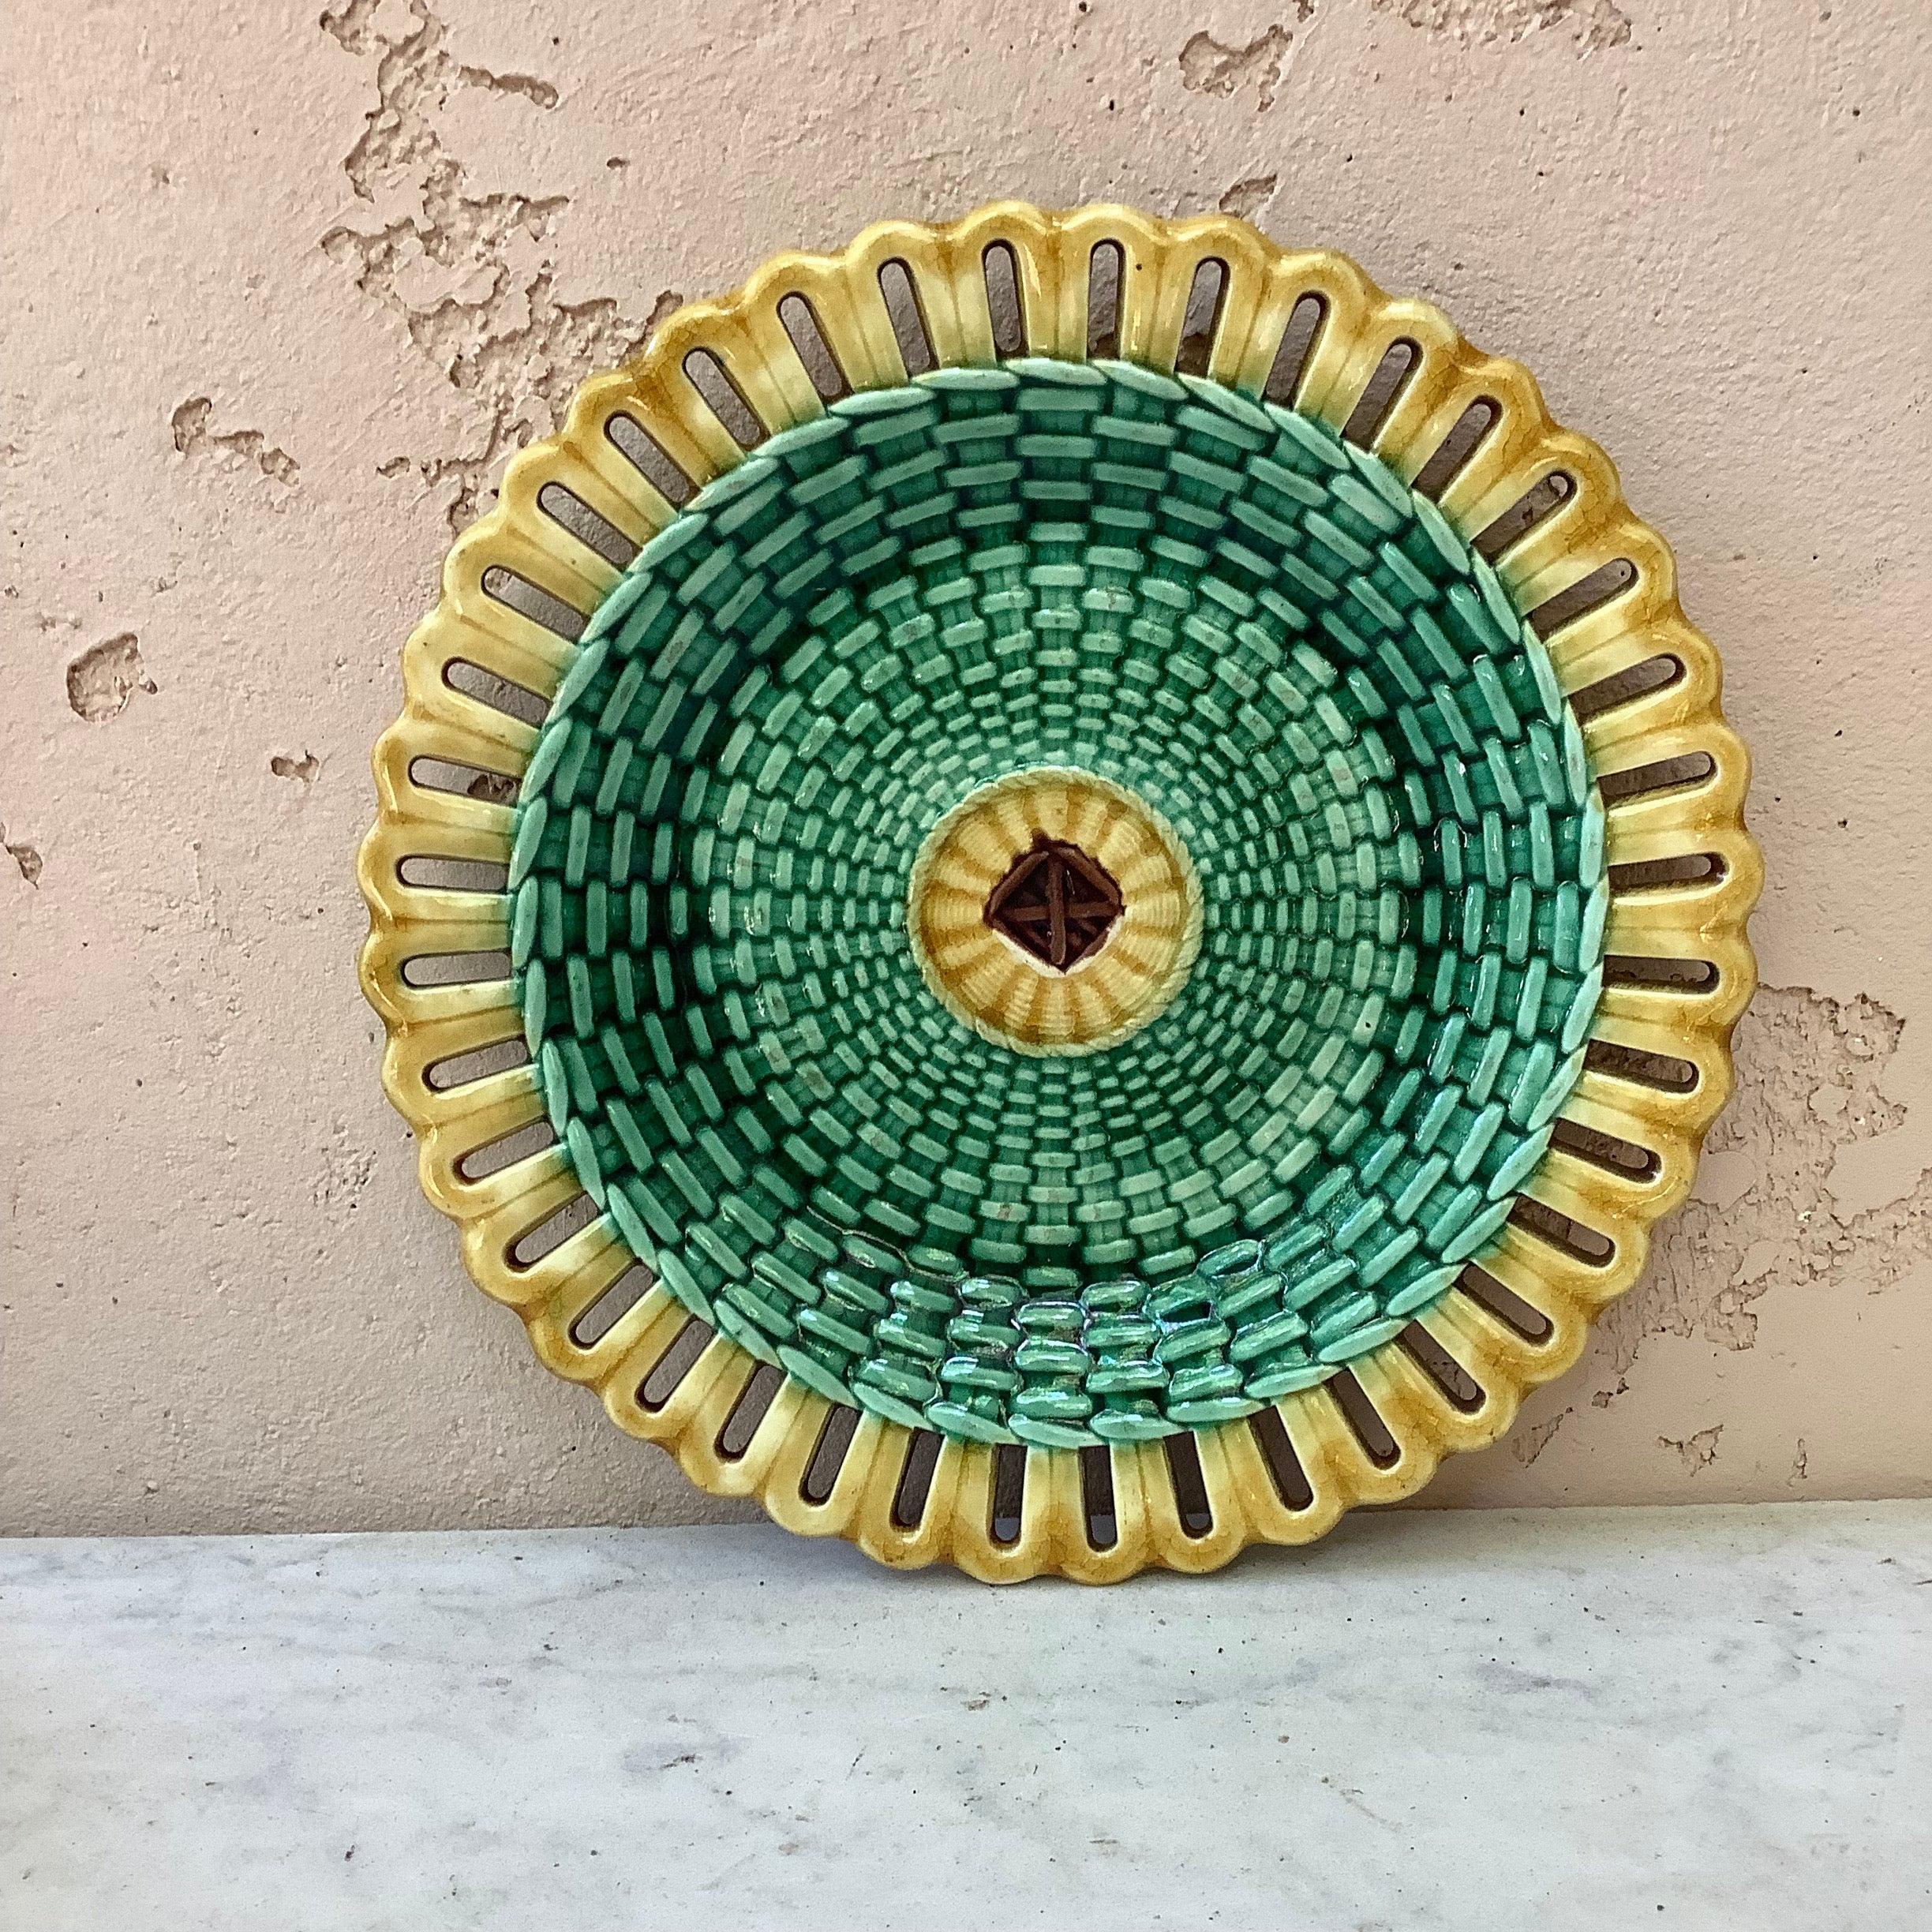 Victorian 19th Century Wedgwood Majolica Reticulated and Basketweave Plate